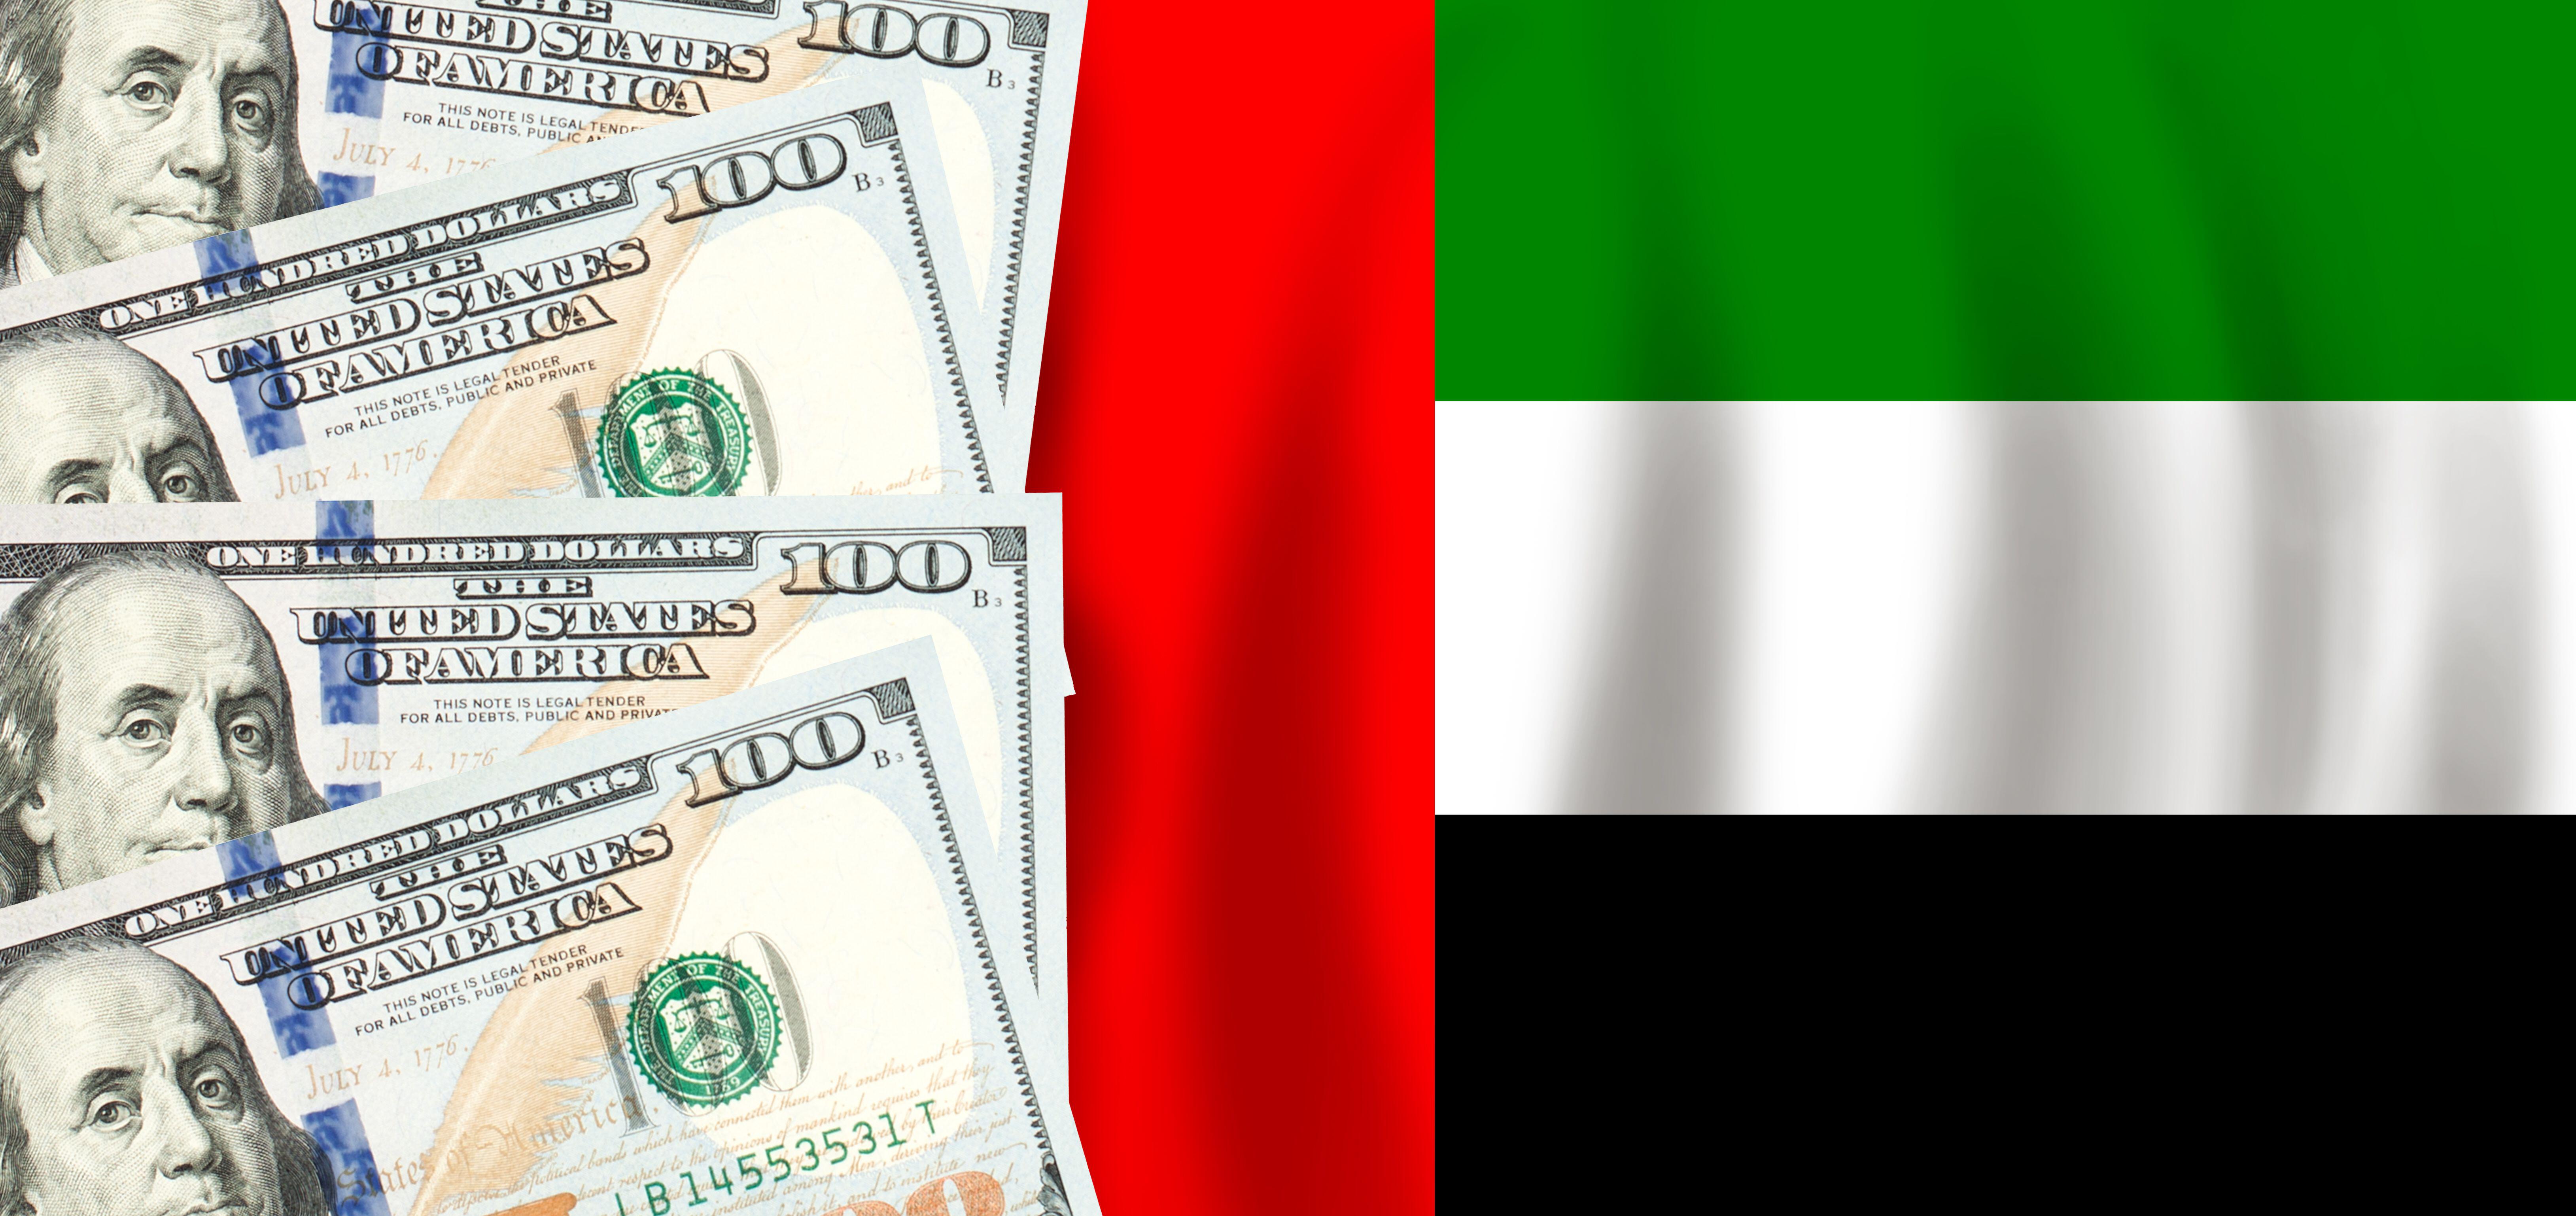 From Dark Reading – UAE, US Partner to Bolster Financial Services Cybersecurity